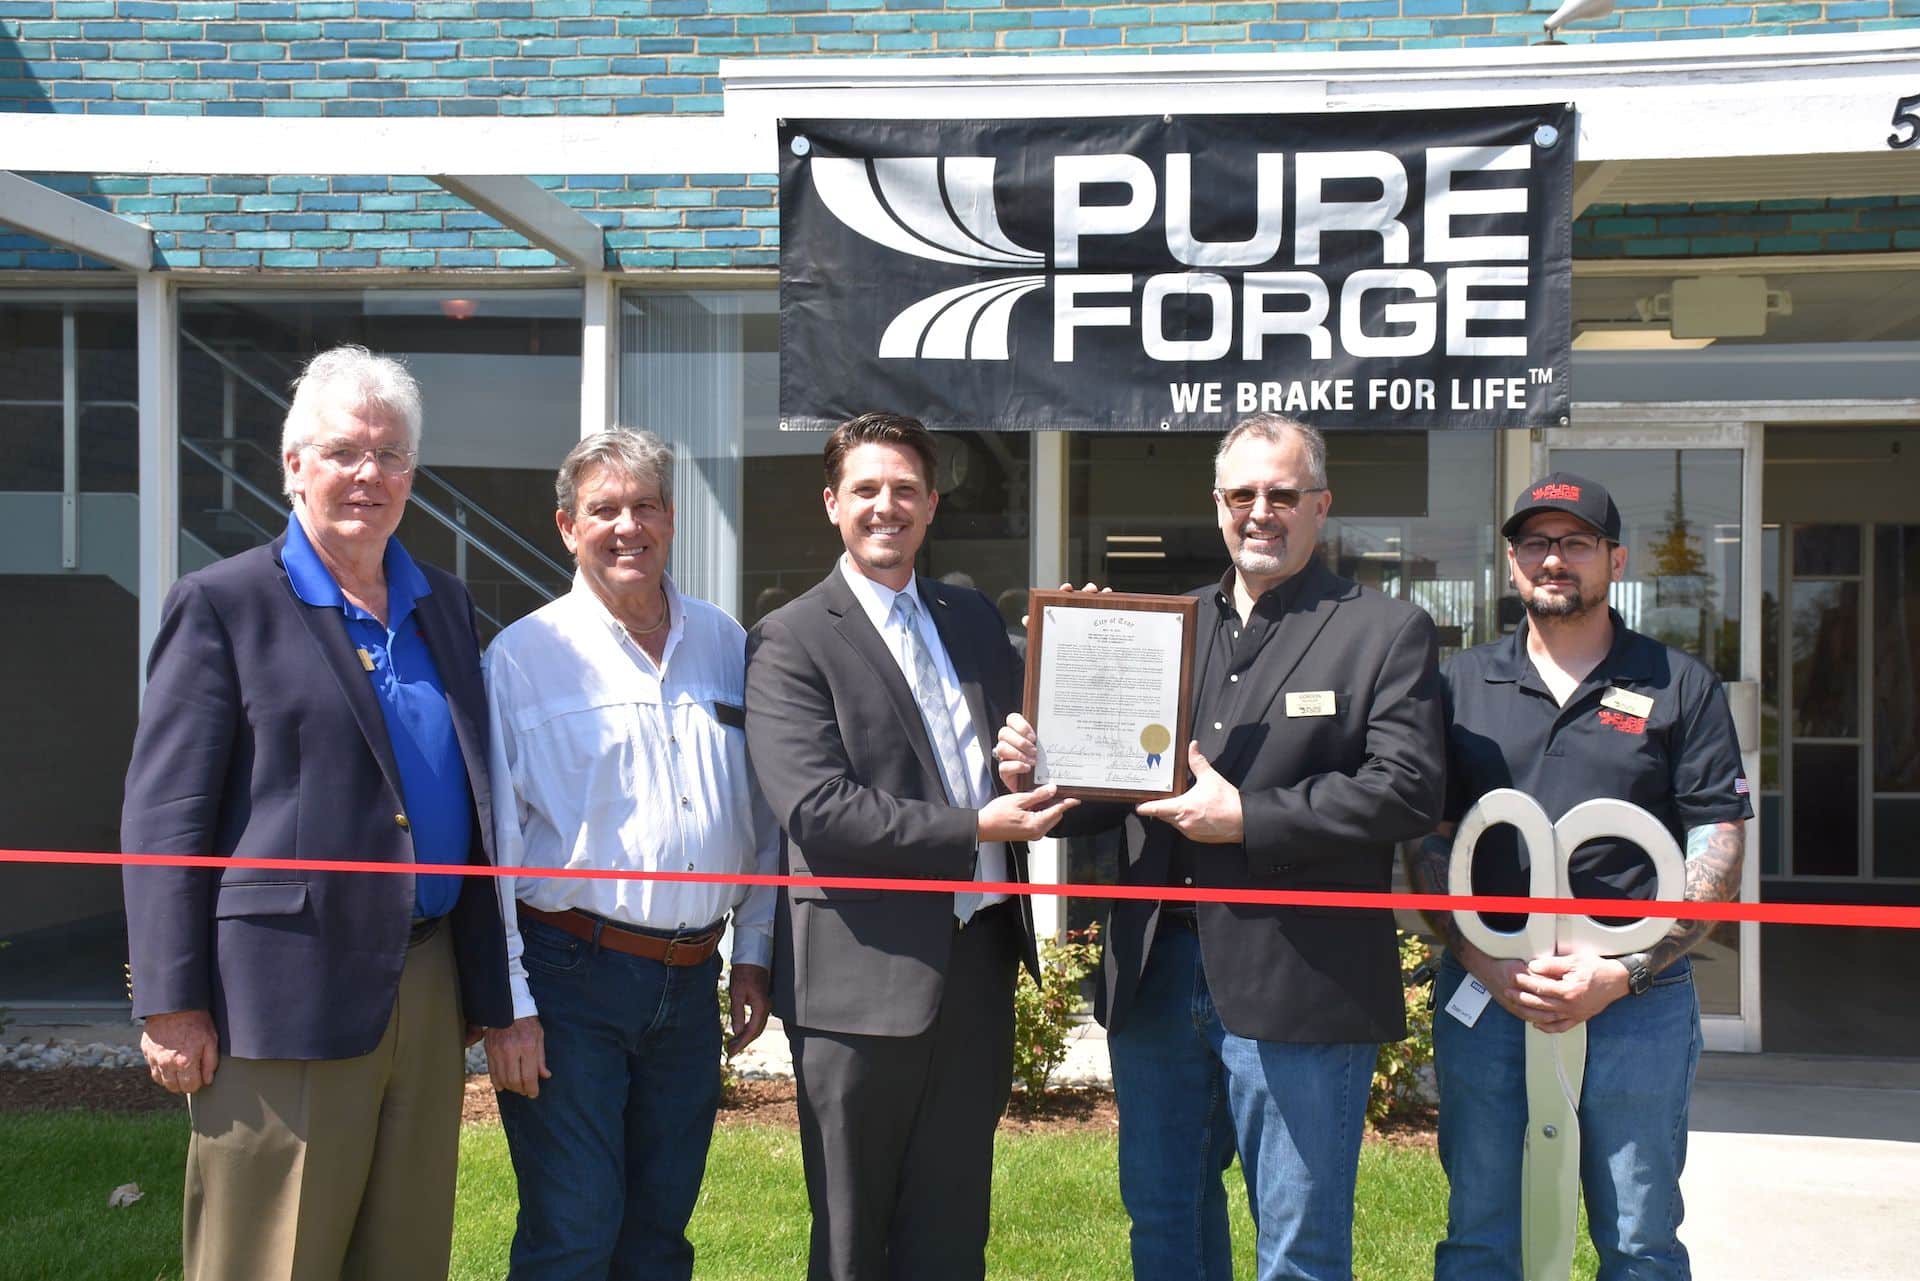 PureForge Relocates to Troy, Michigan, Introduces Disruptive Brake Technology